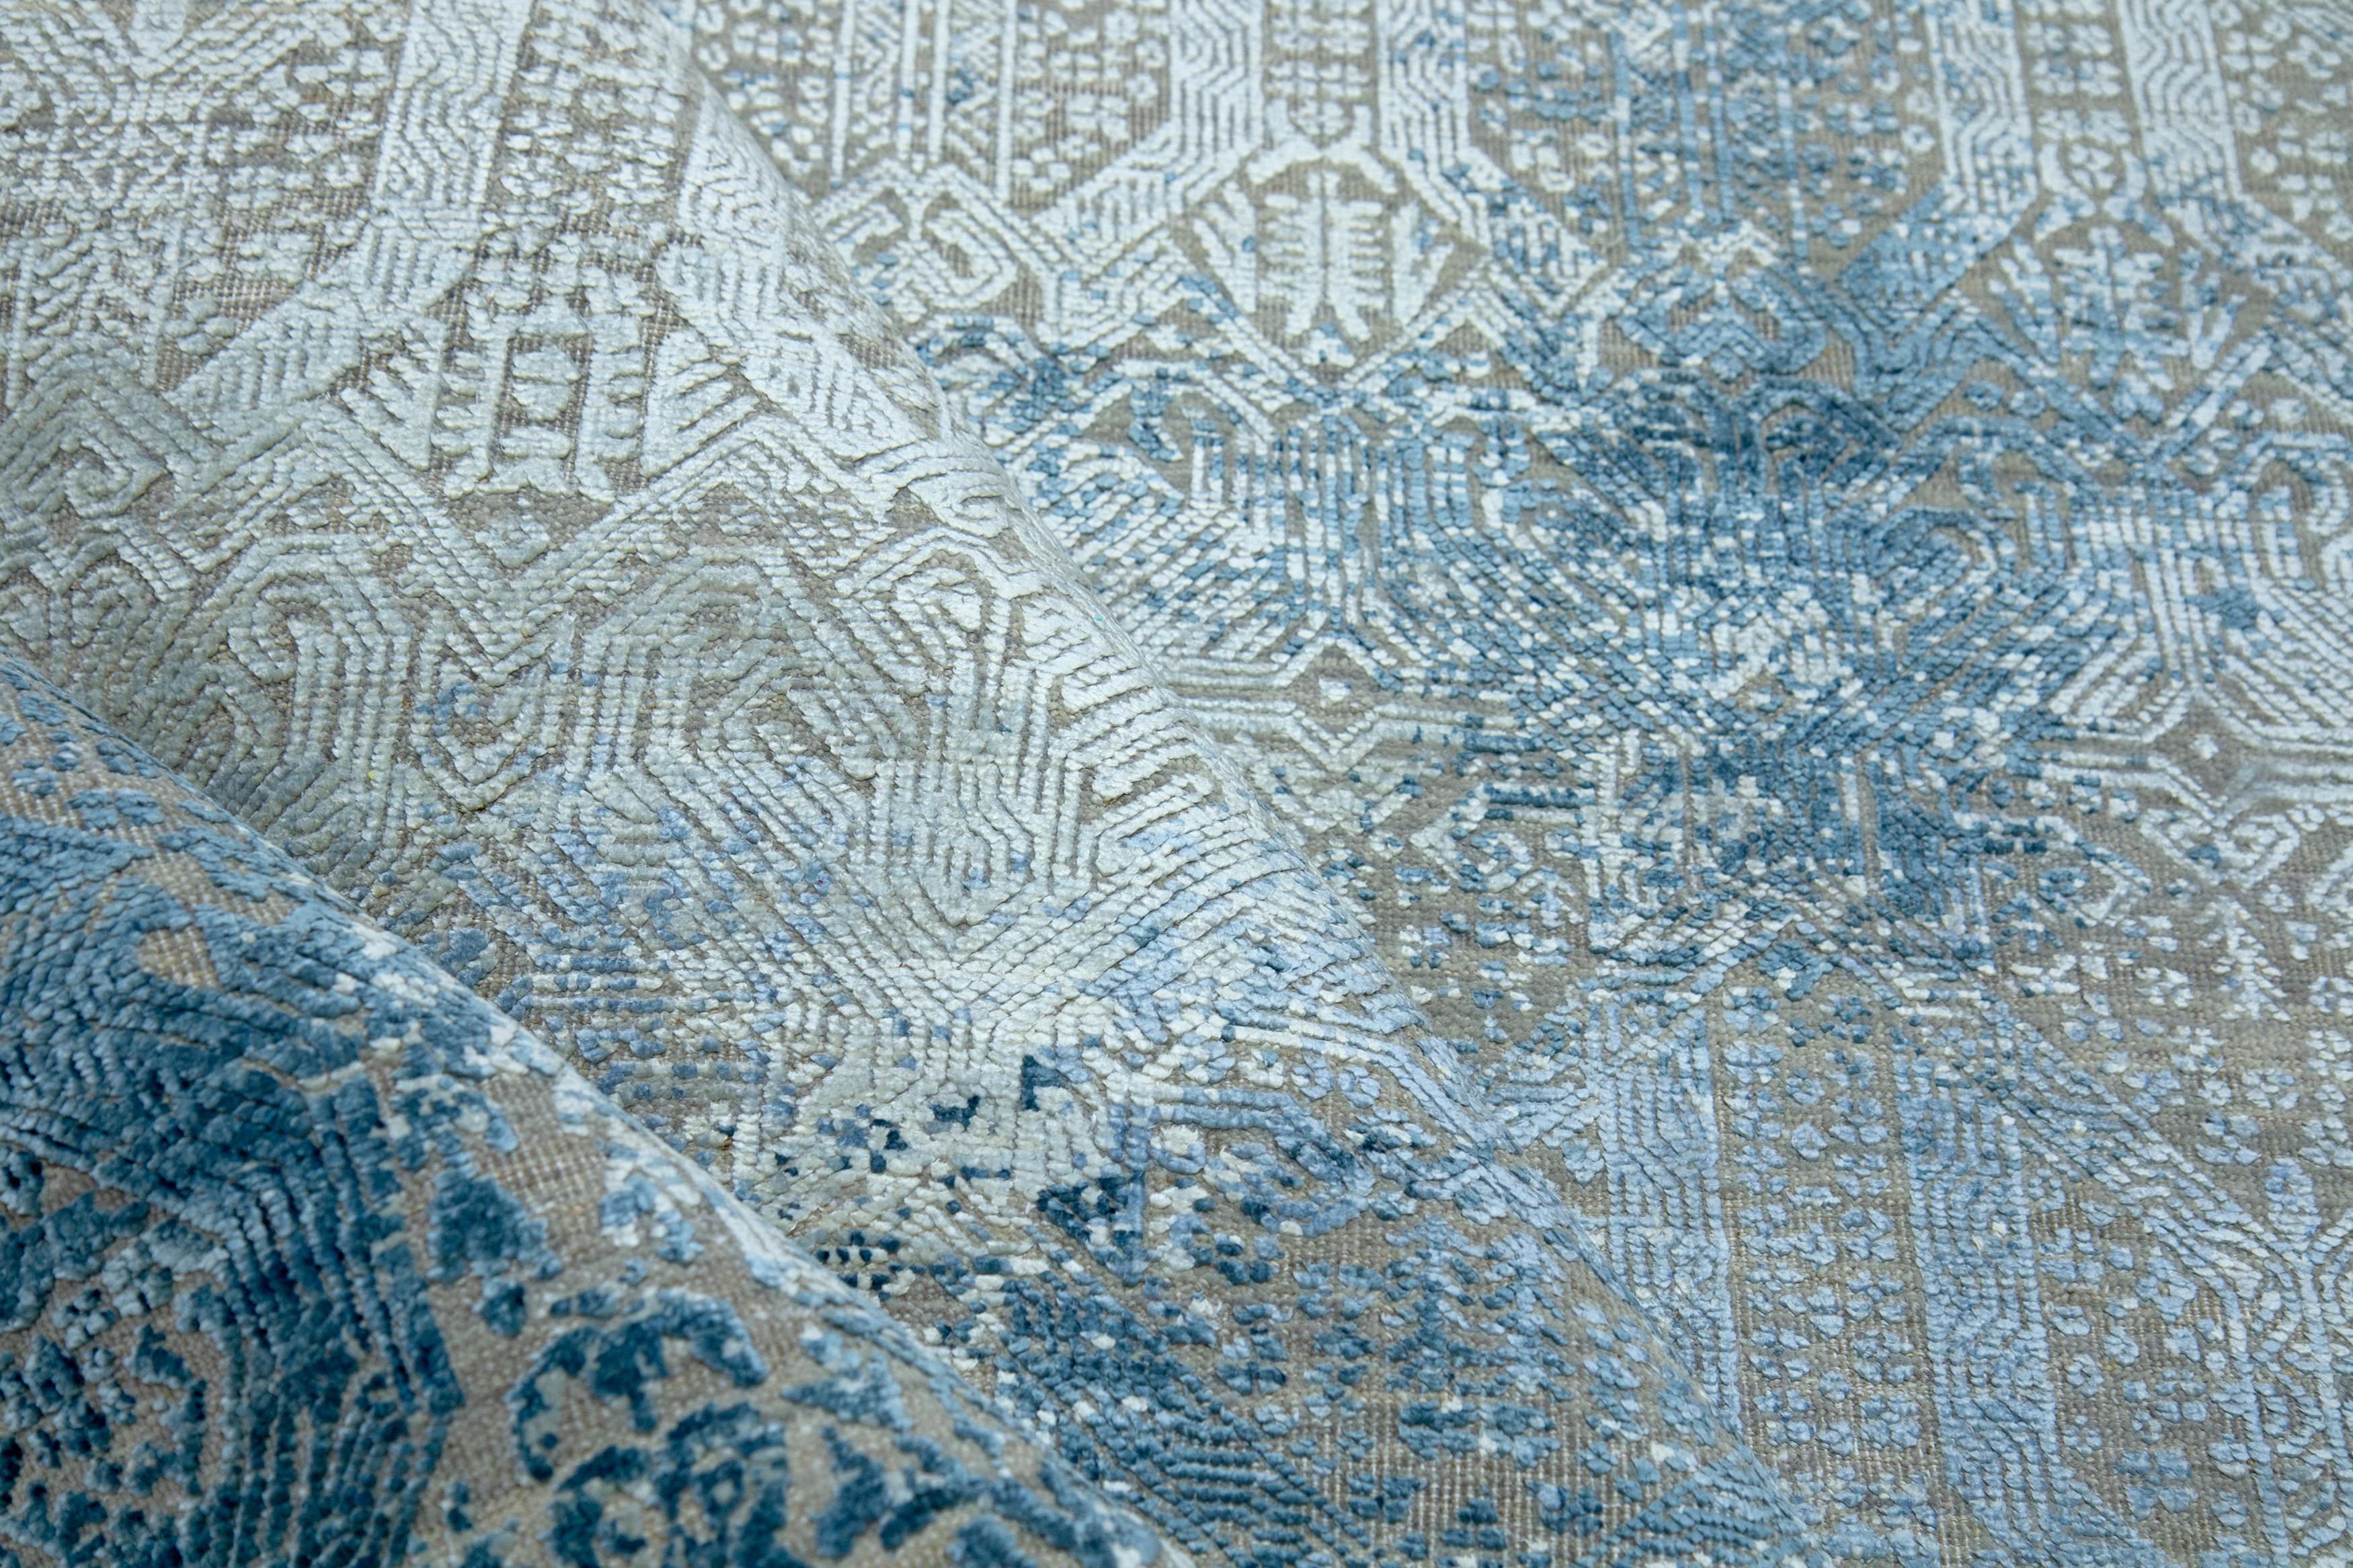 Kimia grey blue
Rug from Allegory collection of edition Bougainville
Persian hand knotted
Wool, pure silk
Size: 300 x 400cm.

ALLEGORY
Our collection, Allegory, is a tribute to the persian culture and their secular art form used in the creation of